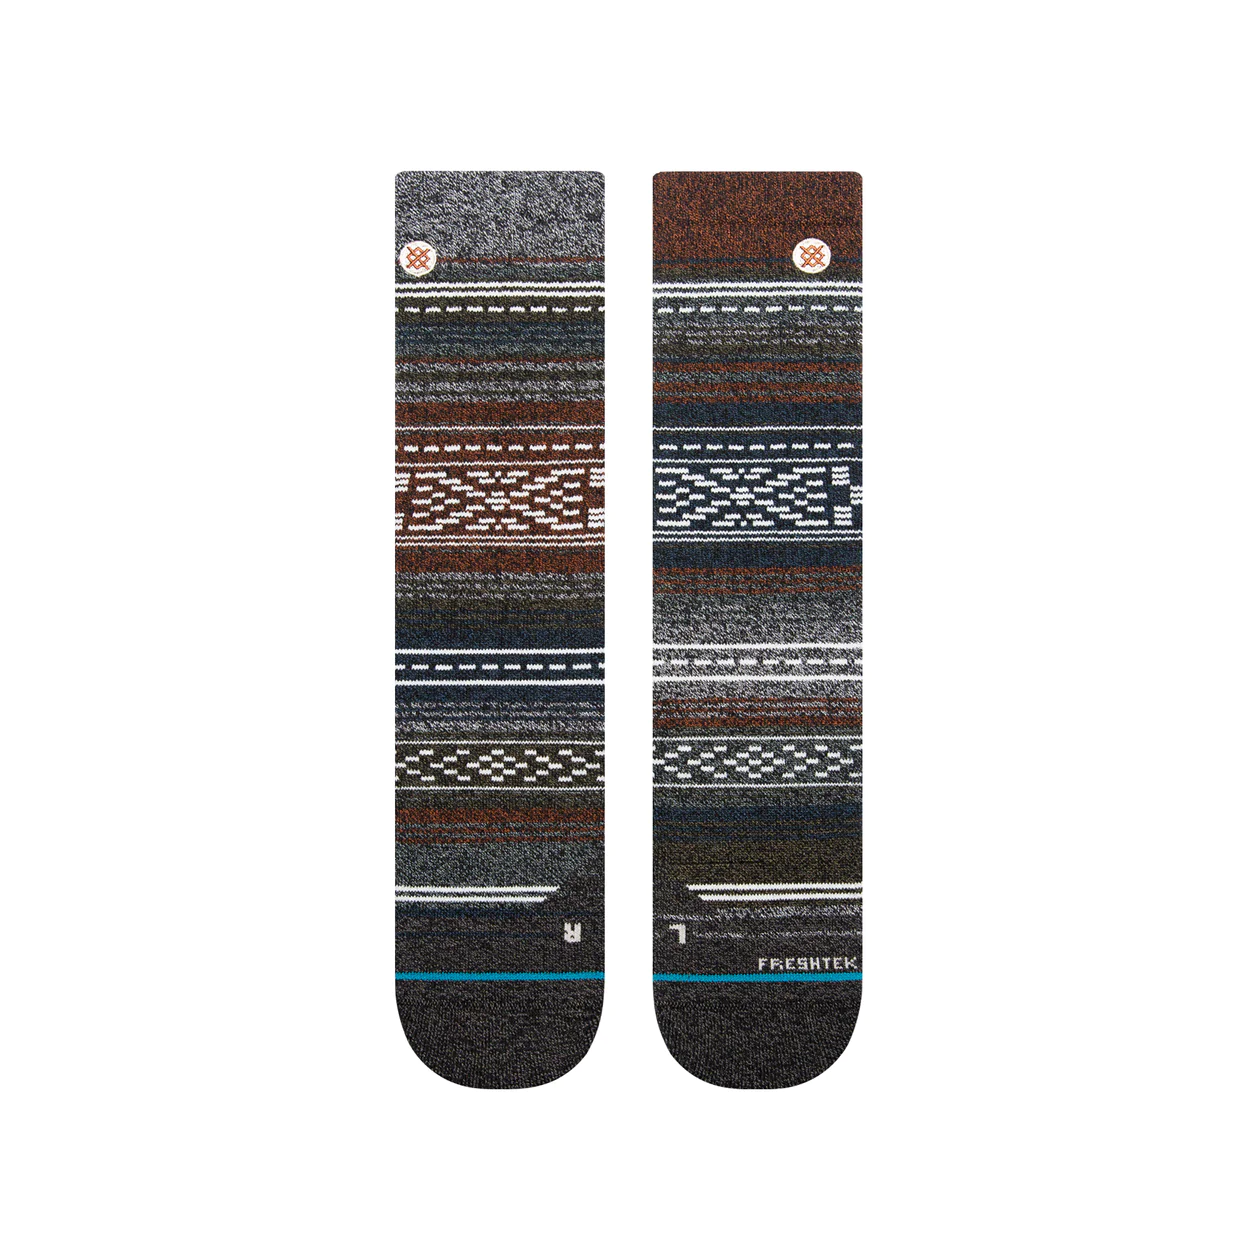 Stance Stance Windy Peaks - Teal